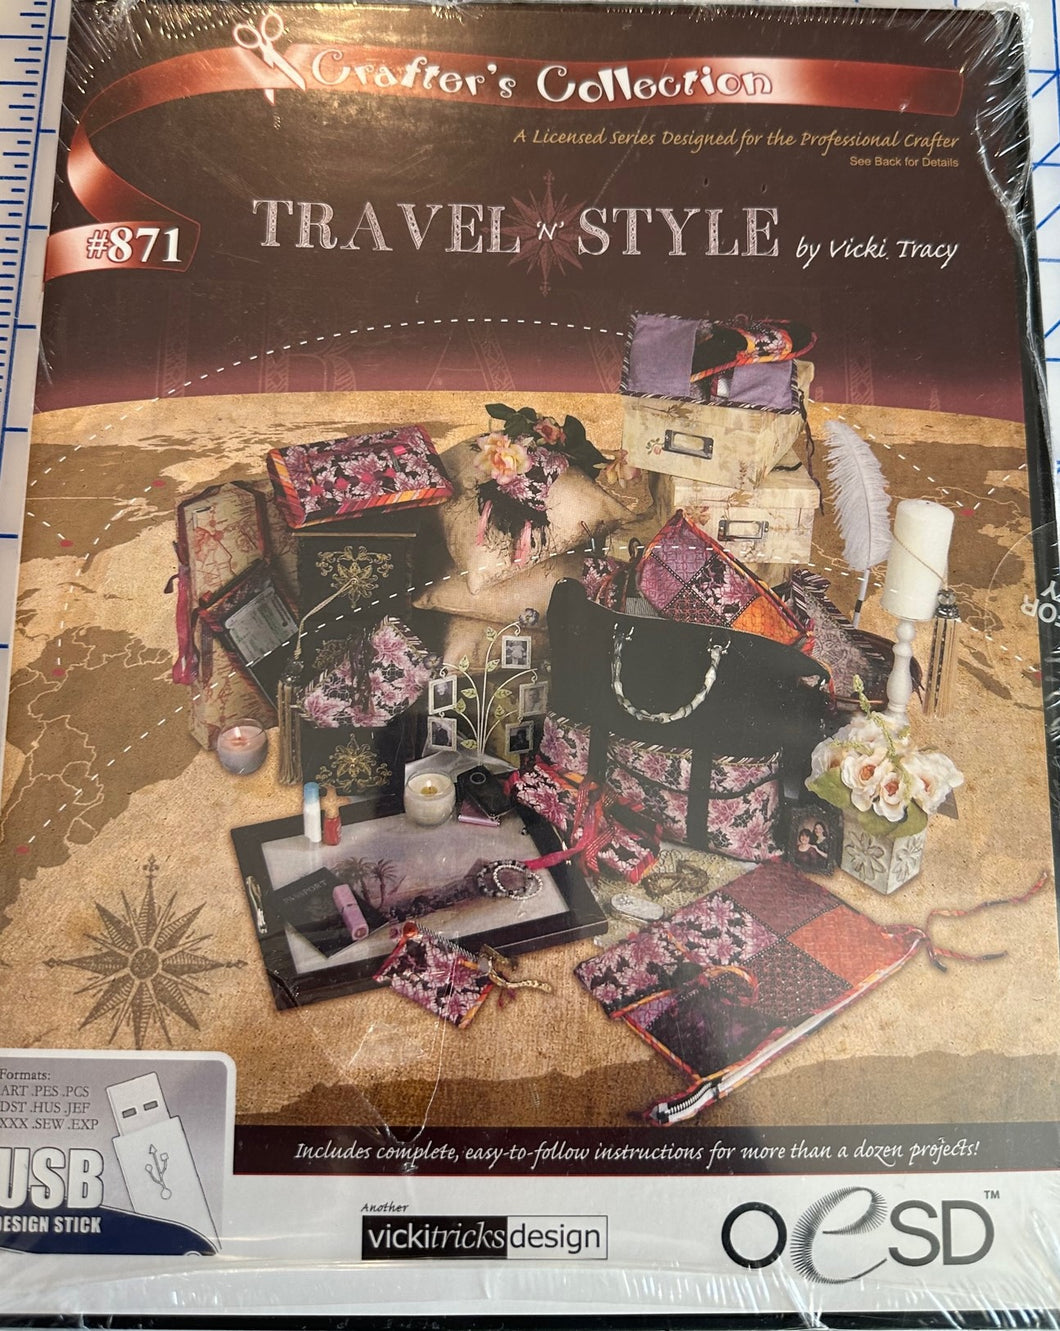 #871 TRAVEL 'N' STYLE by Vicki Tracy